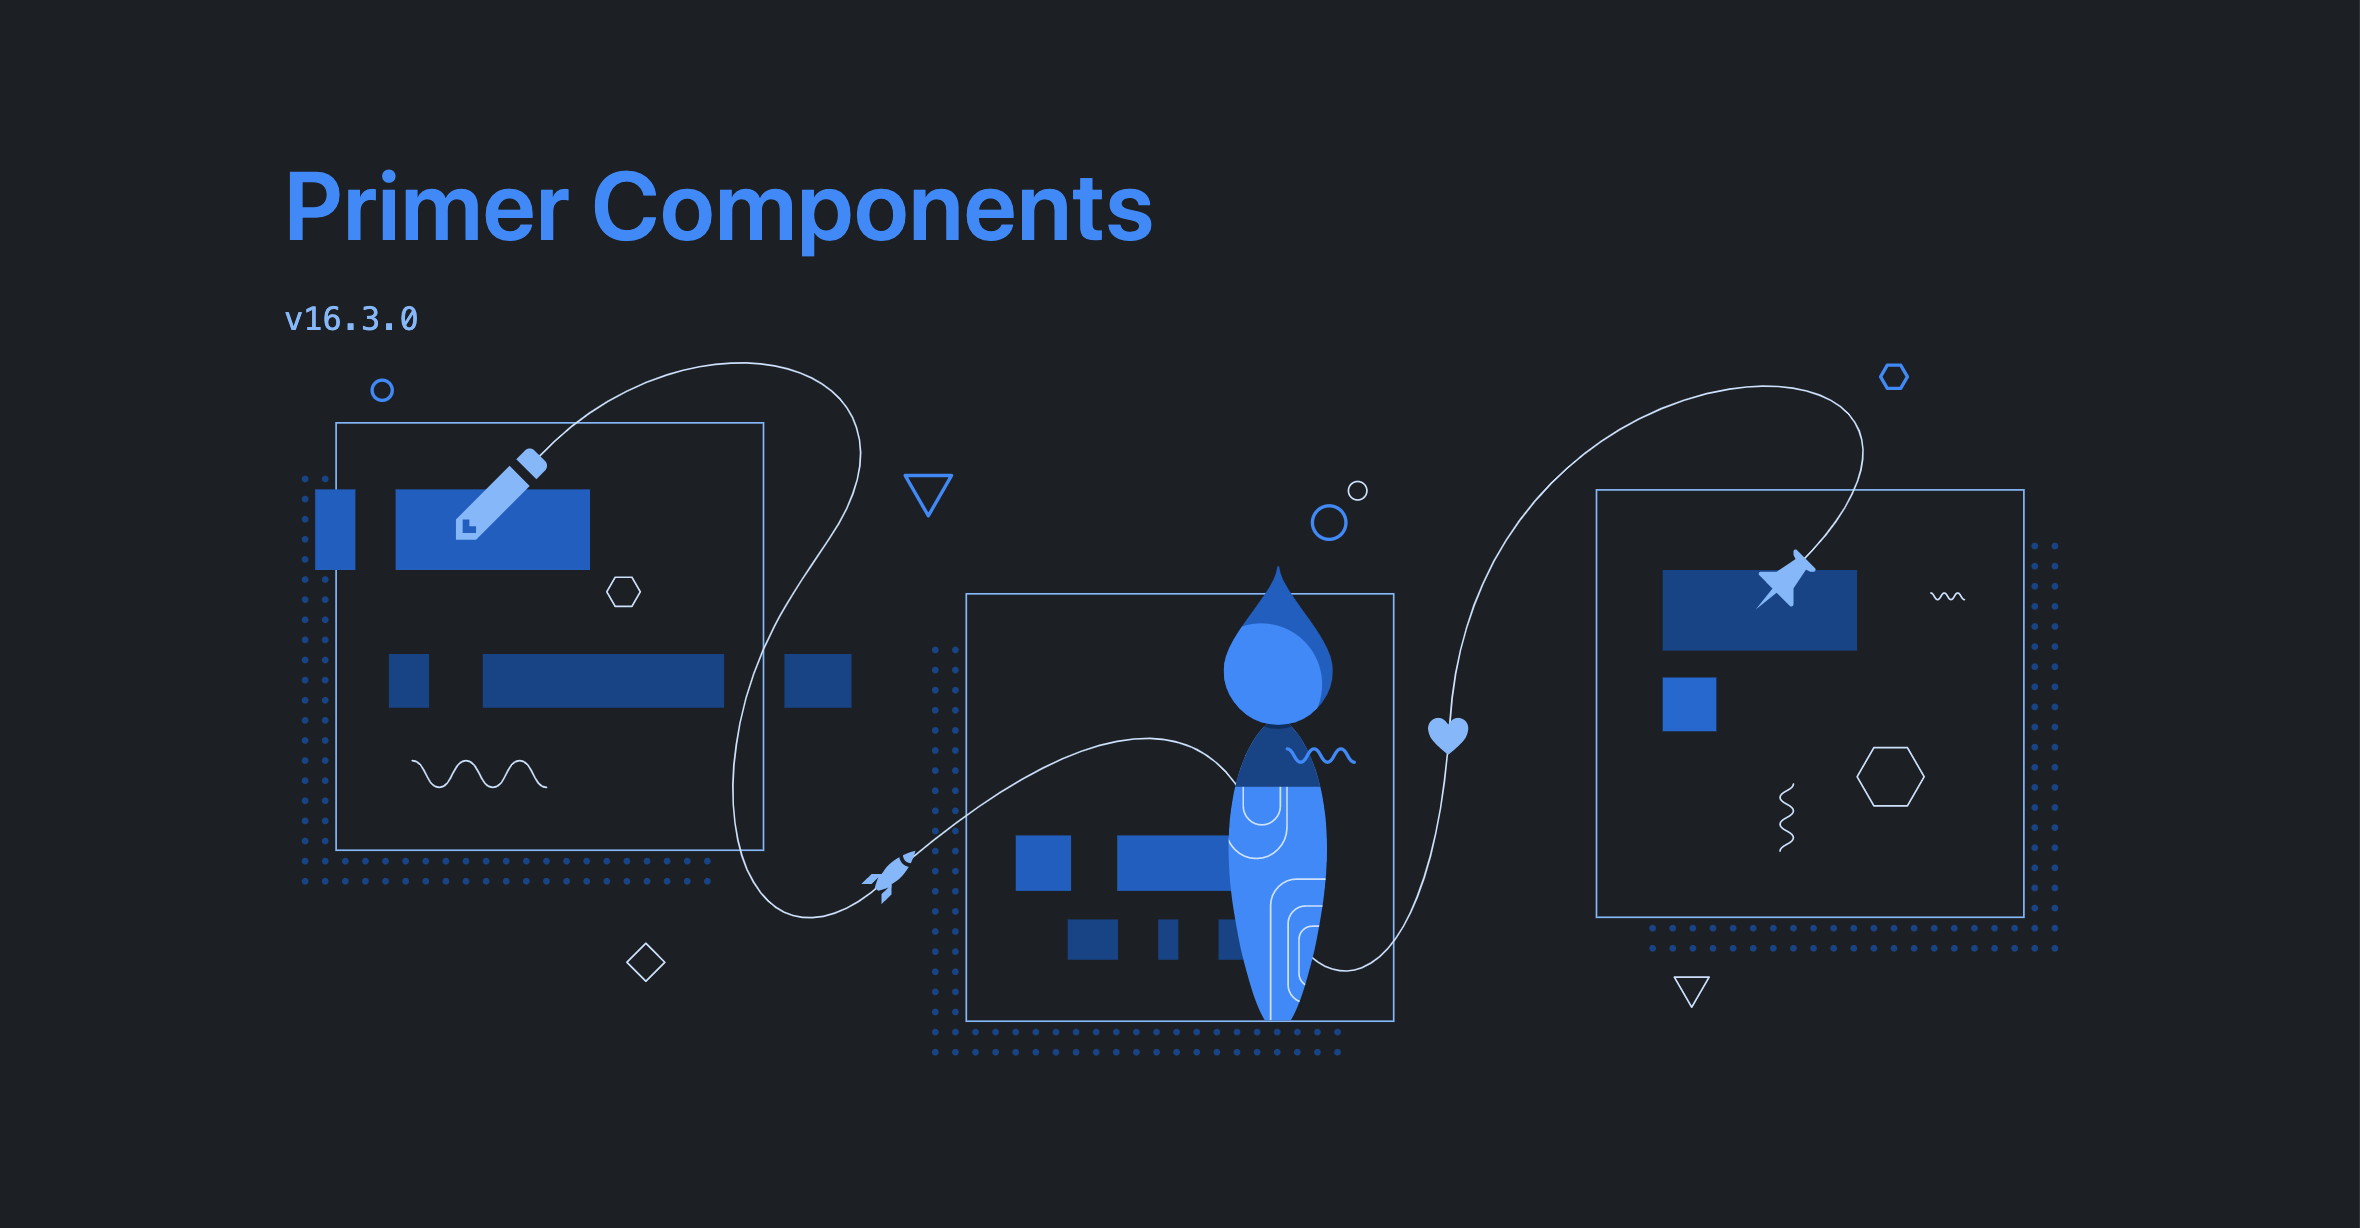 Primer Components is GitHub's design system built with Styled System